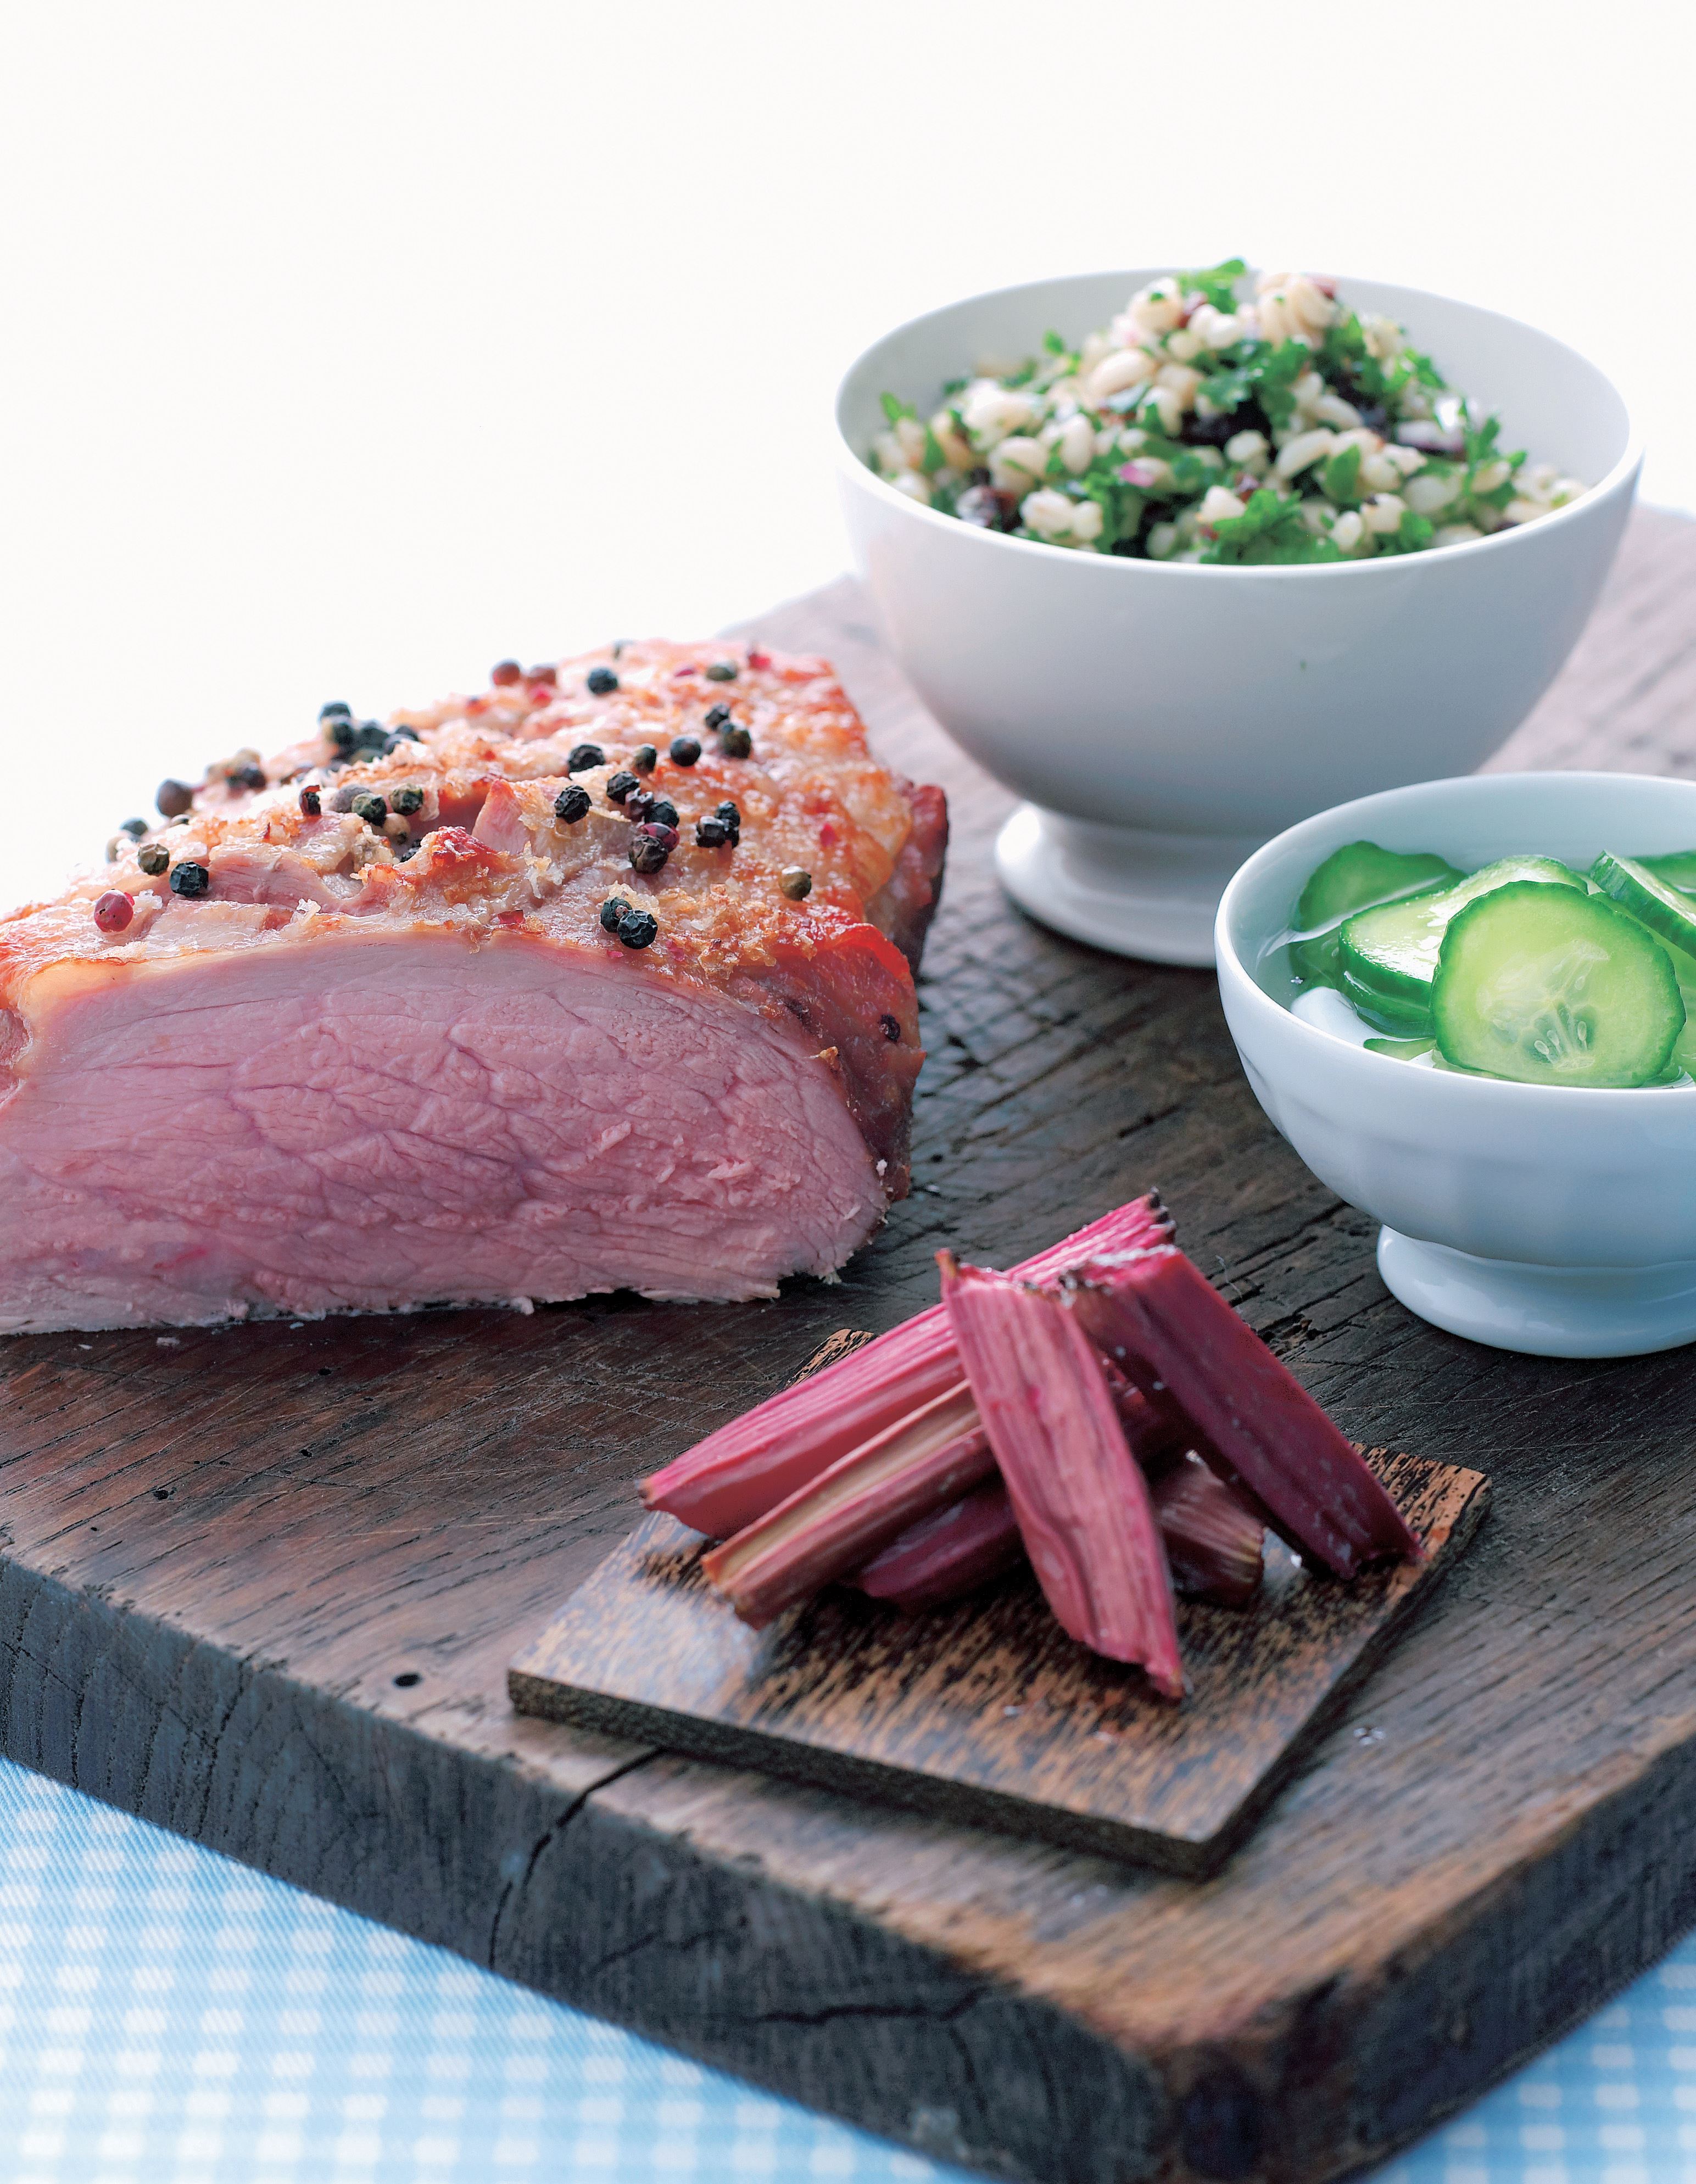 Veal with baked rhubarb, sweet and sour cucumber salad, and barley salad